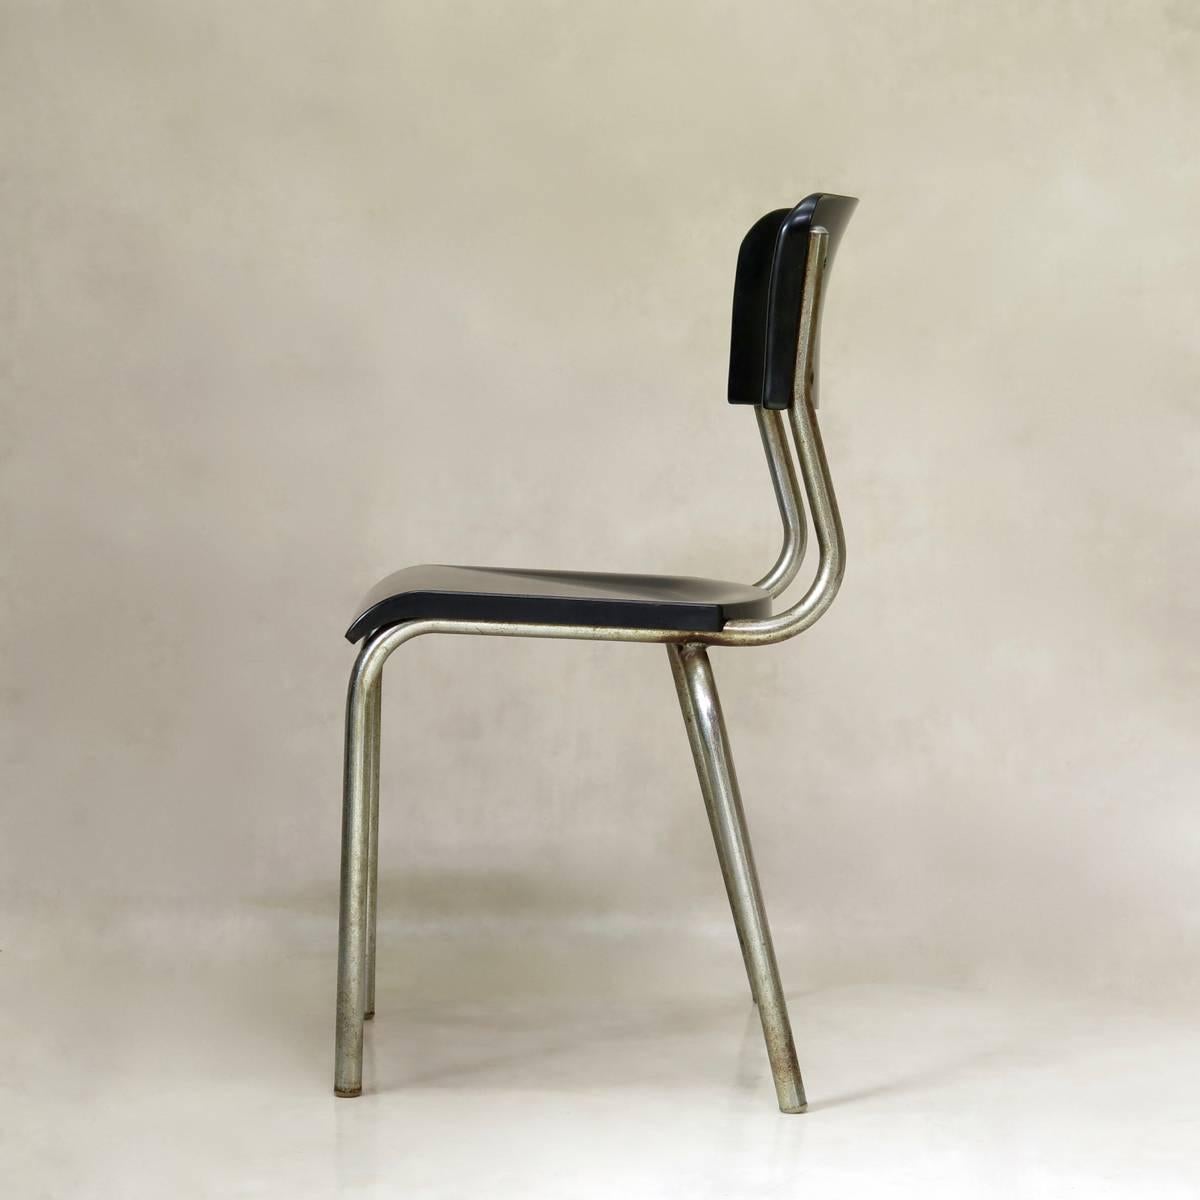 20th Century Rene Herbst Bakelite and Chrome Chairs '12 Available', France, 1950s For Sale